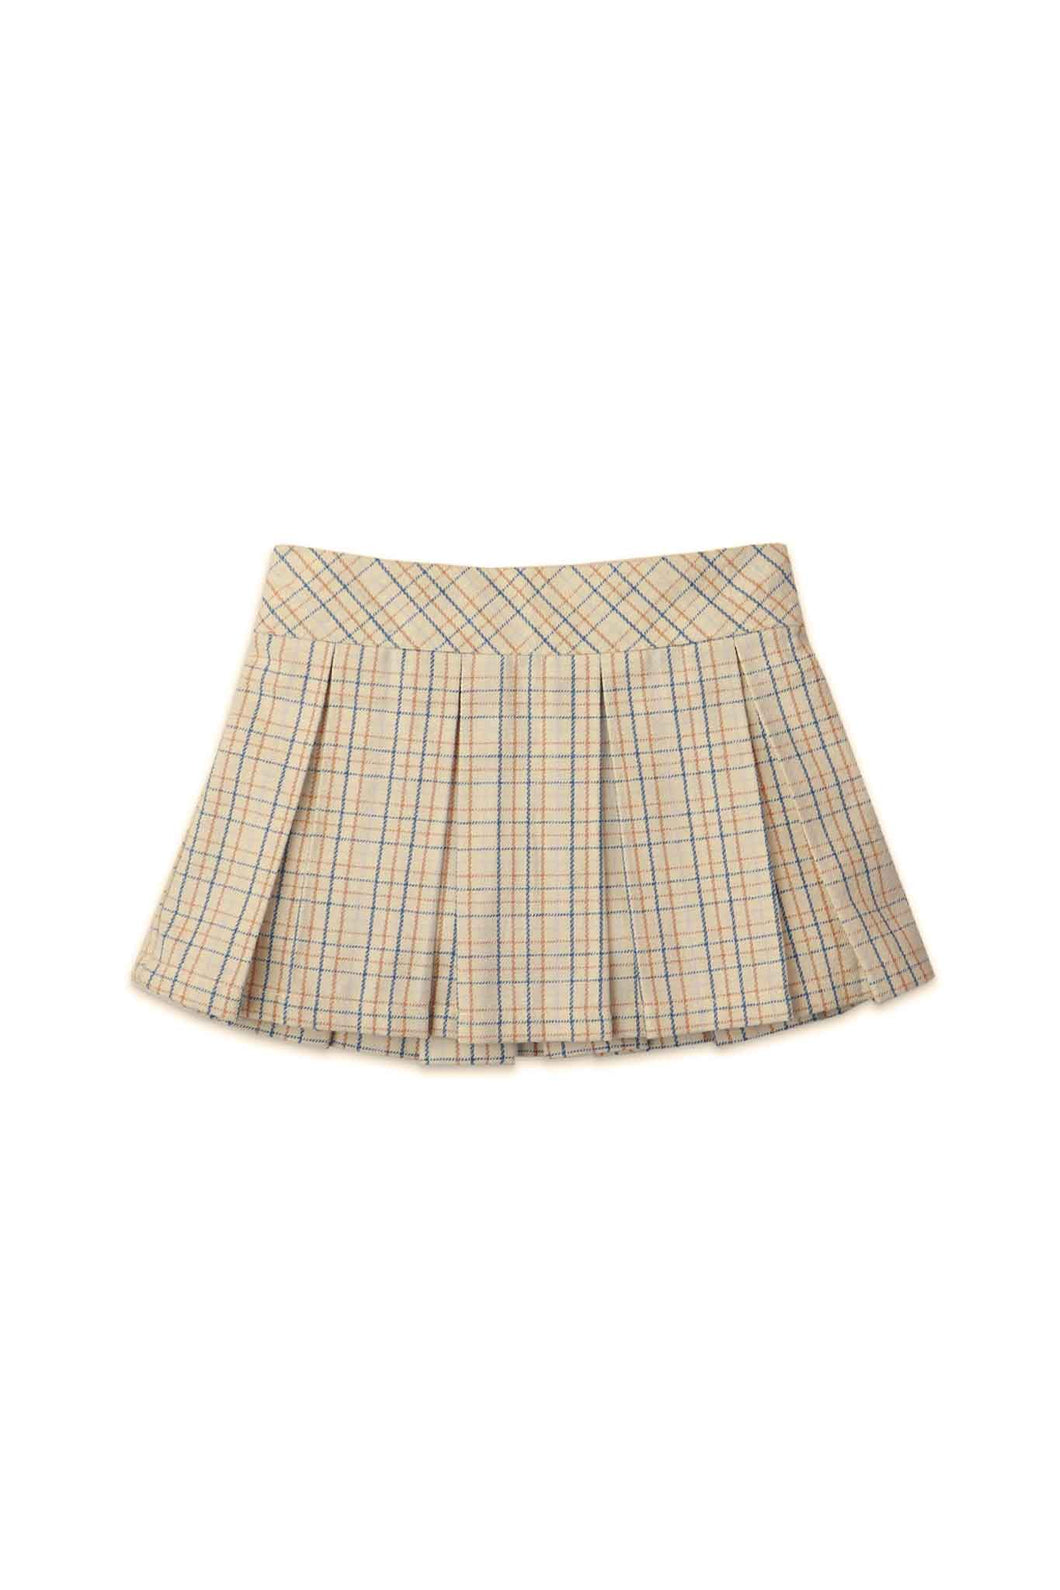 Gingersnaps Checkered Print Pleated Pull On Skirt